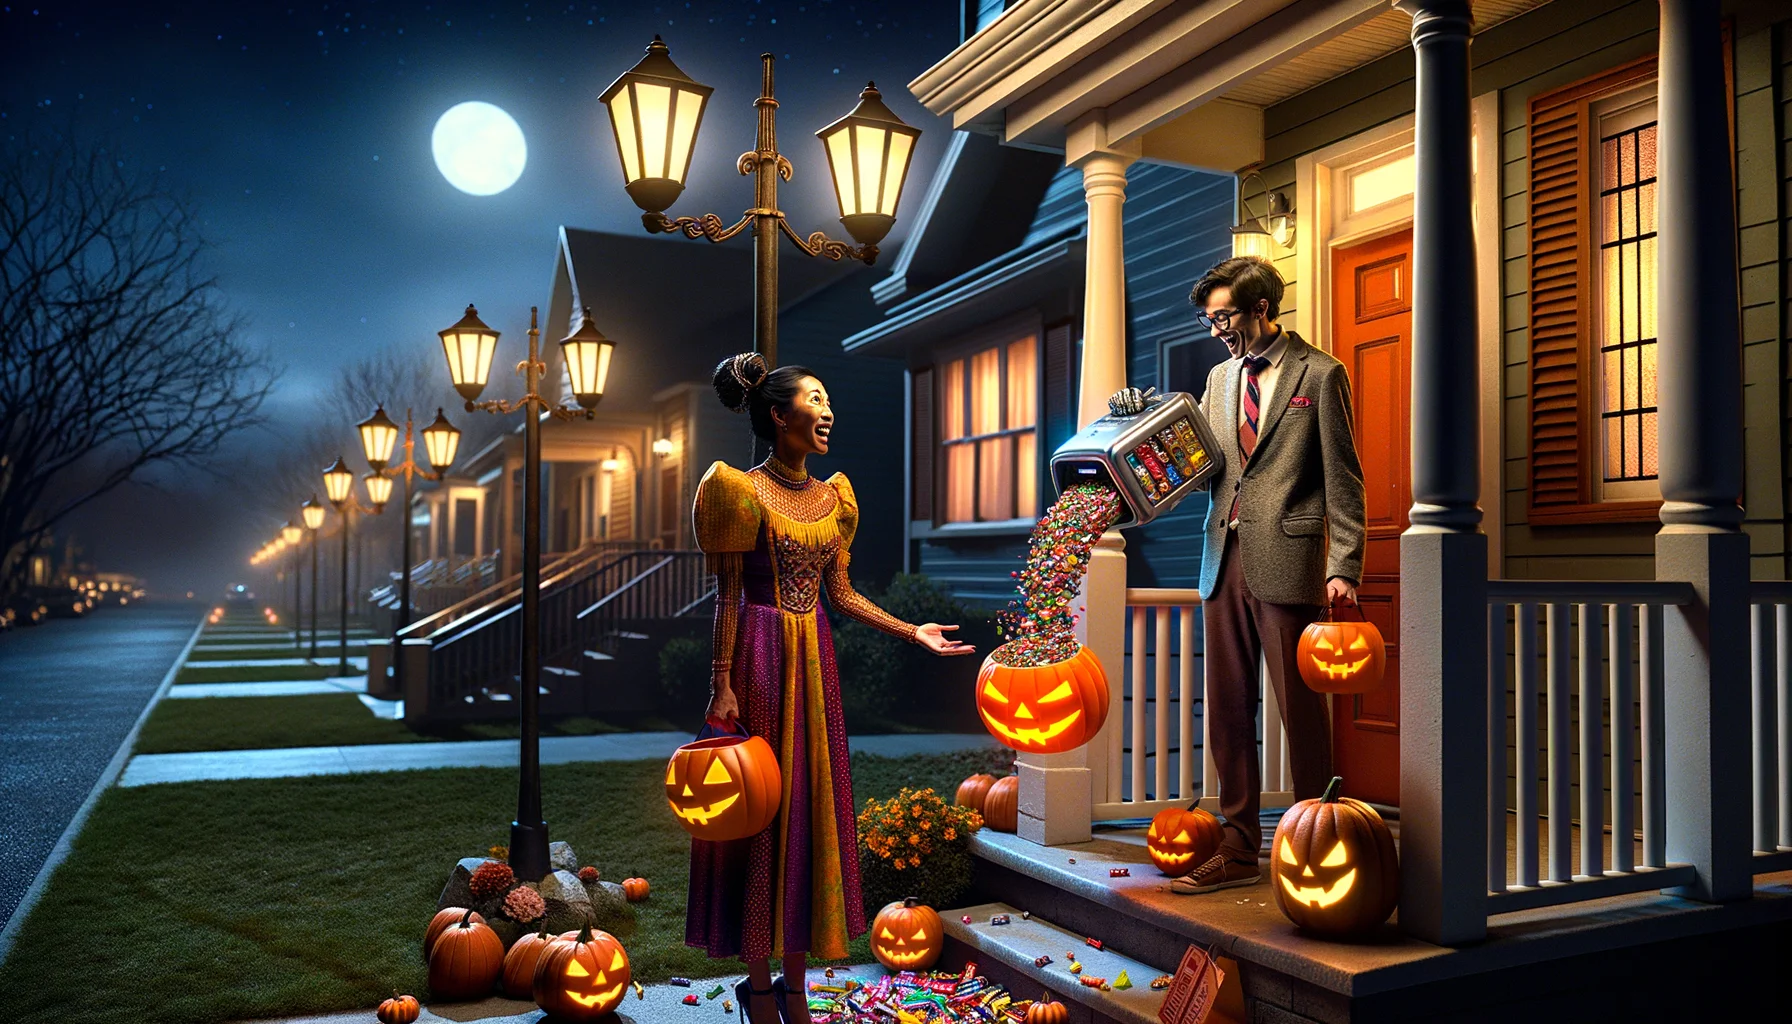 A humorous and realistic scene unfolds on a crisp Halloween night. Street lamps beautifully illuminate a neighborhood with houses decorated in festive Halloween regalia. On one porch, a tall woman of South Asian descent and a short man of Hispanic descent, both in creative costumes, eagerly hold out their 'trick or treat' bags. To their delight, a pair of robotic hands pops out of a jack-o-lantern to dispense an array of the most desired candies. Colorful sweets rain down into their bags, causing the duo to look at each other and laugh in utter amazement.